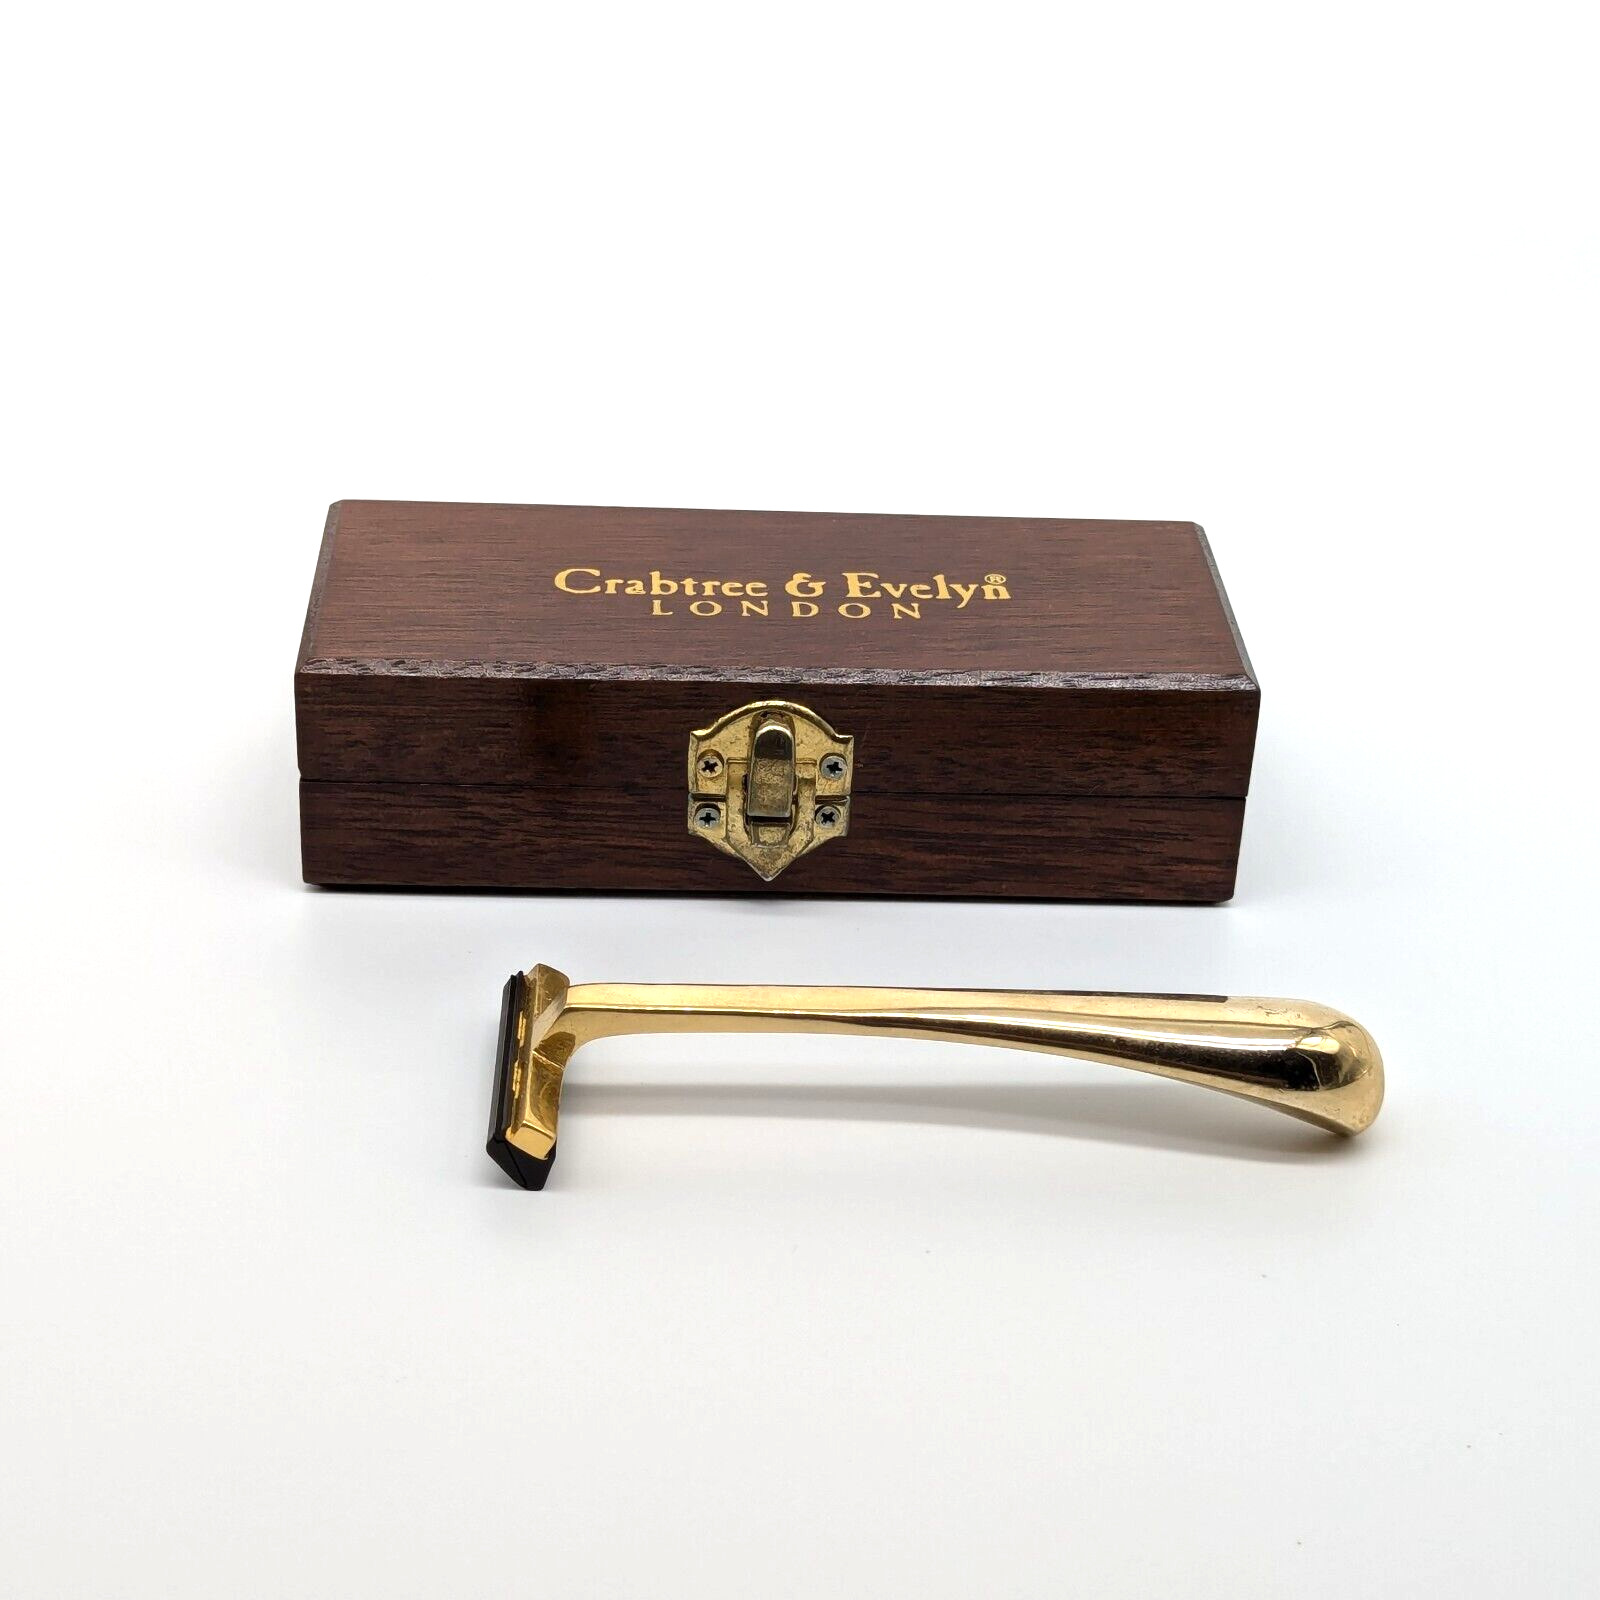 Crabtree & Evelyn London Gold Tone Metal Razor with Blade in Wooden Box VTG